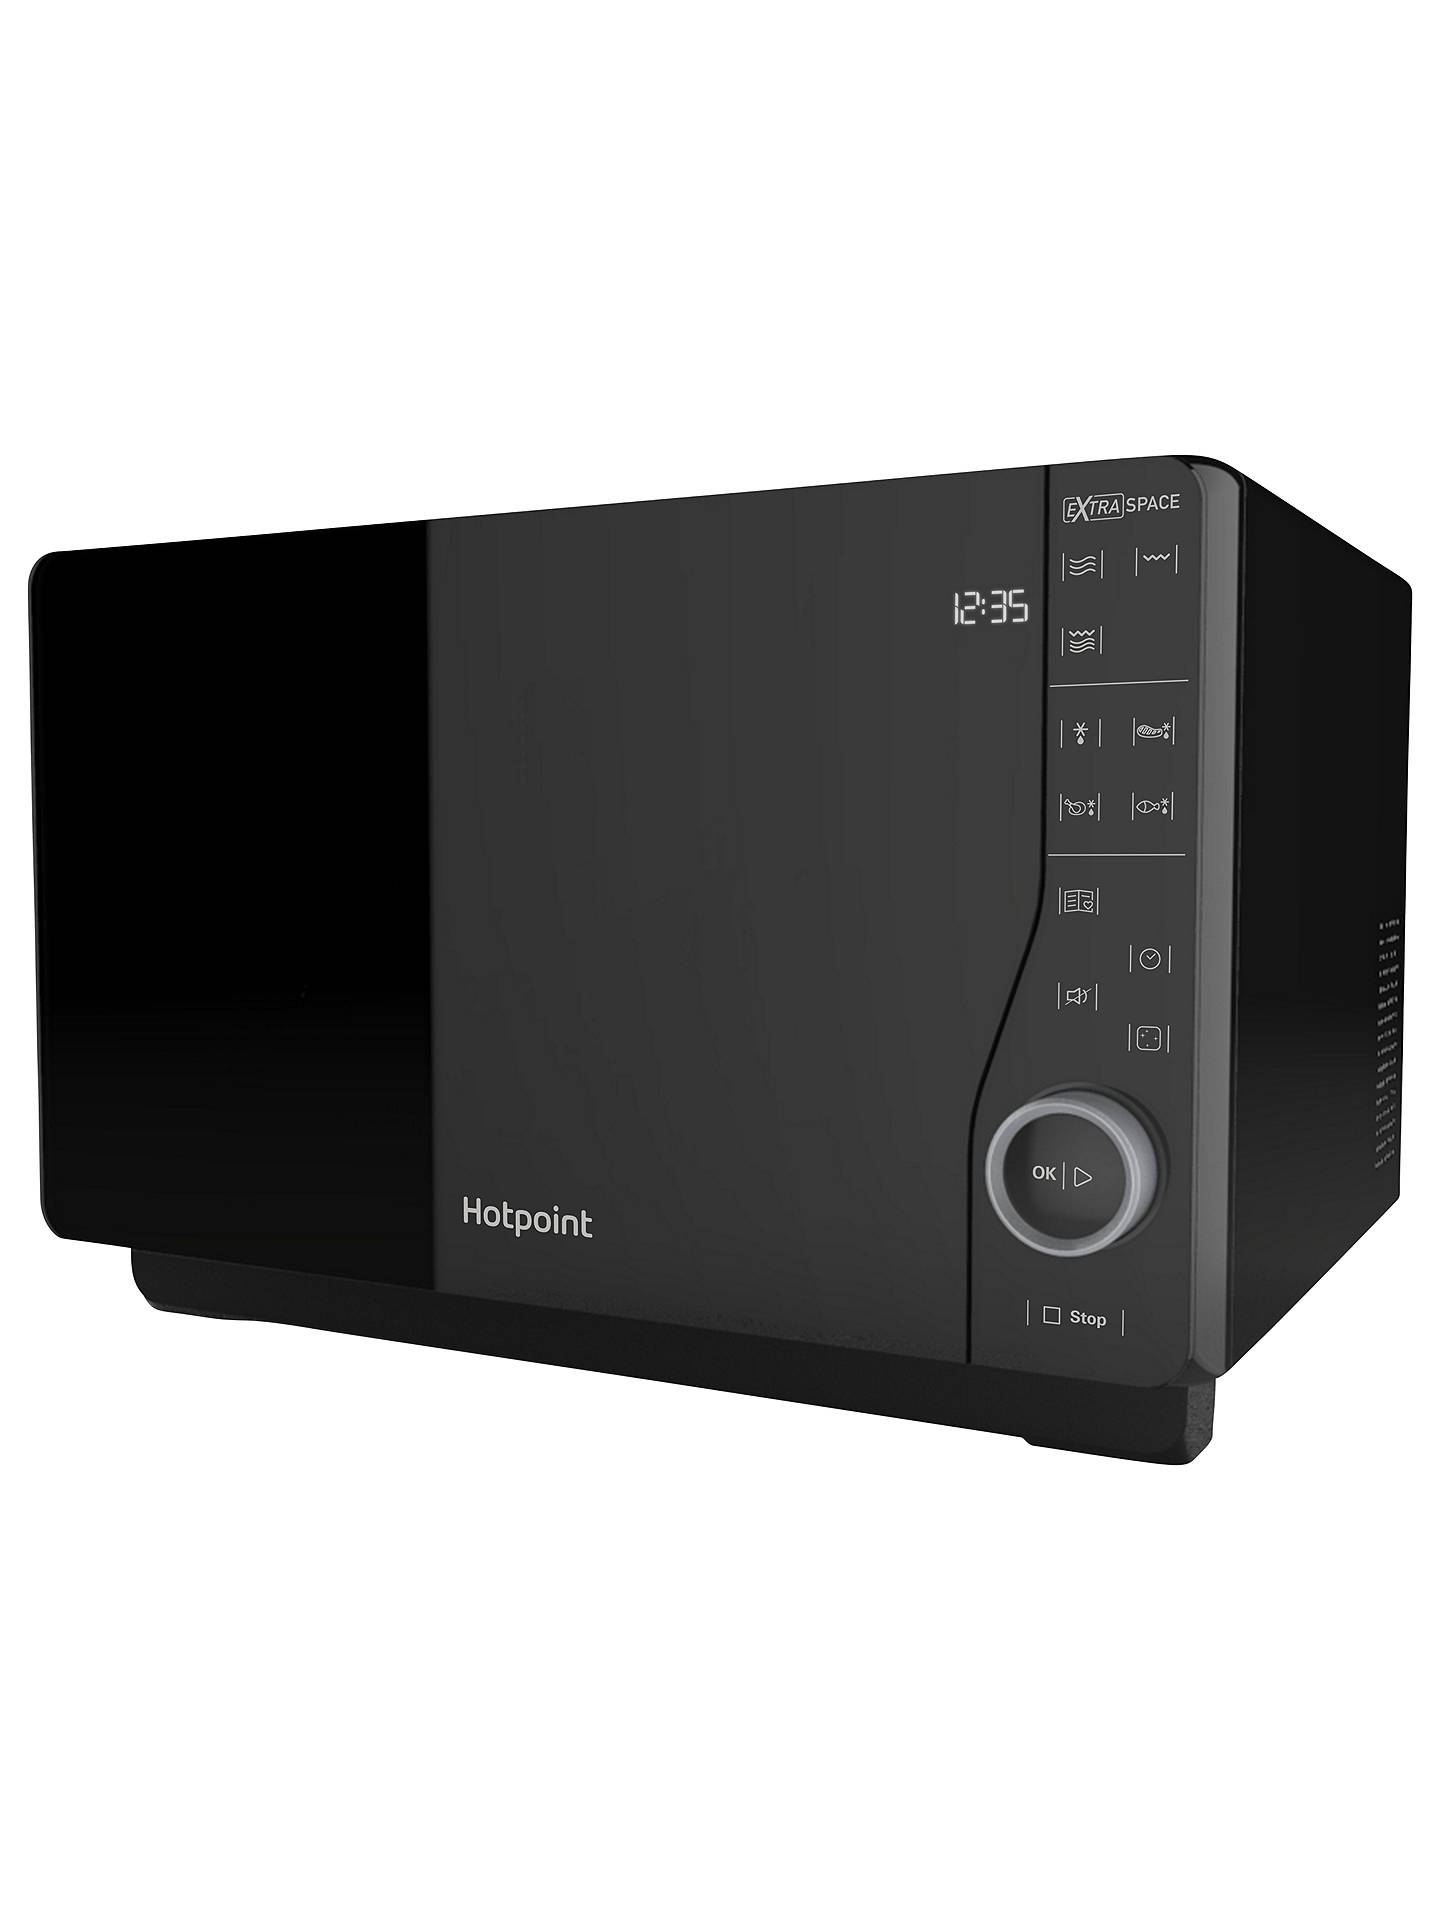 Hotpoint MWH2621MB Freestanding Microwave, Black at John Lewis & Partners